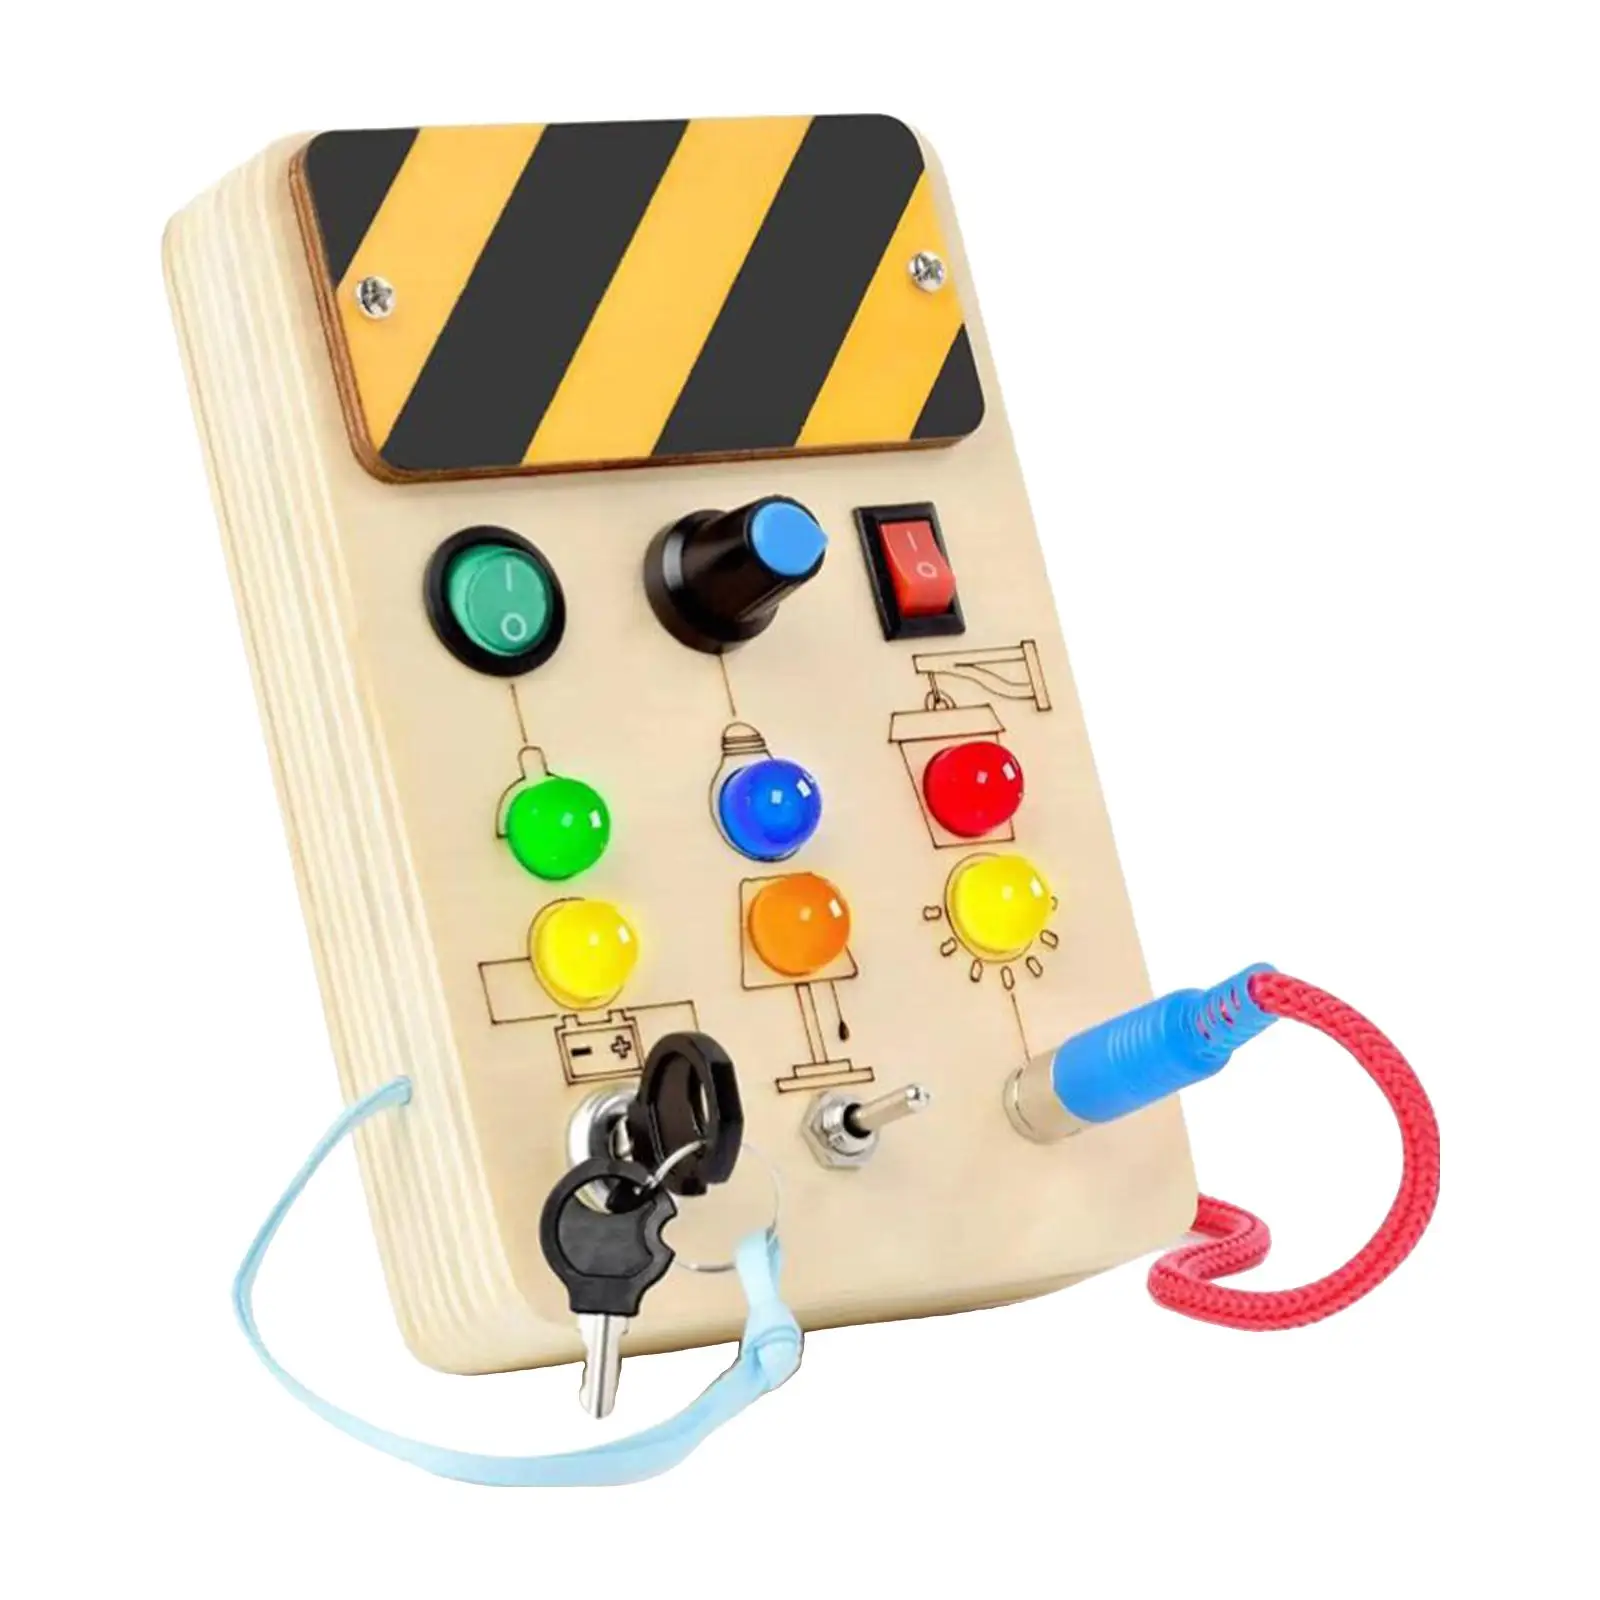 Light switch toy Developmental Toy Toddler Busy Board for Indoor Play Game